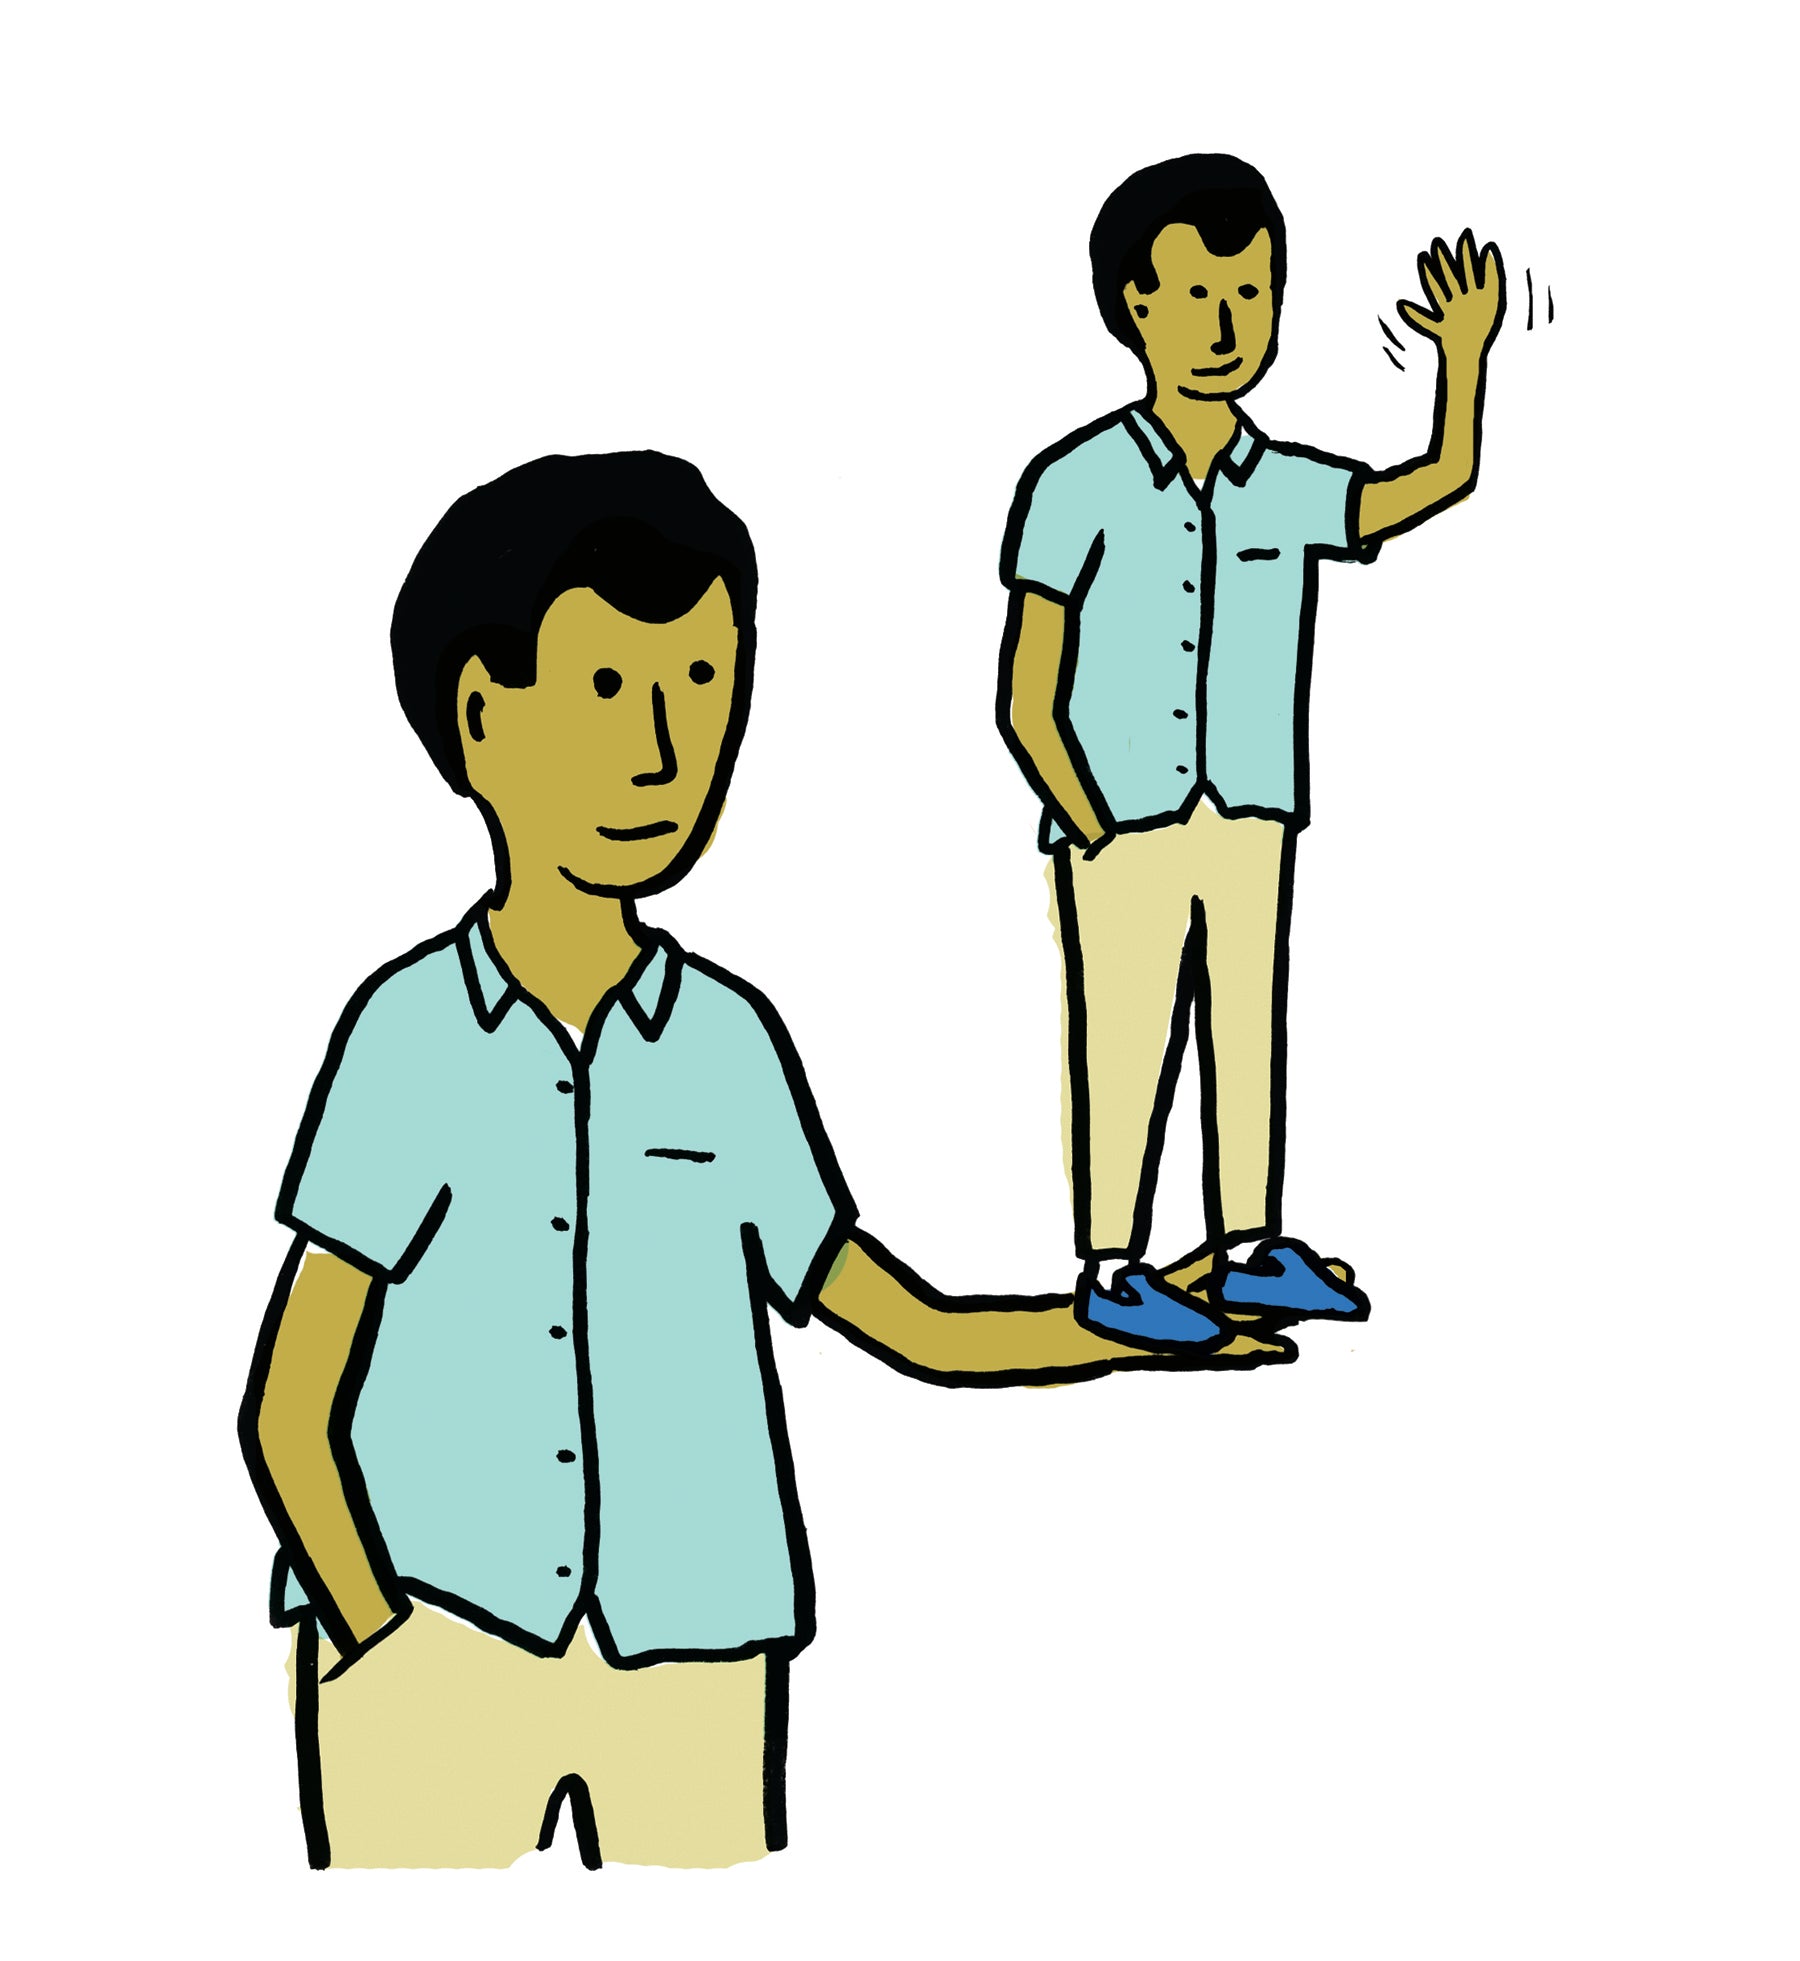 Illustration of a young man holding a mini version of himself in his hand, as a metaphor for introducing himself. 